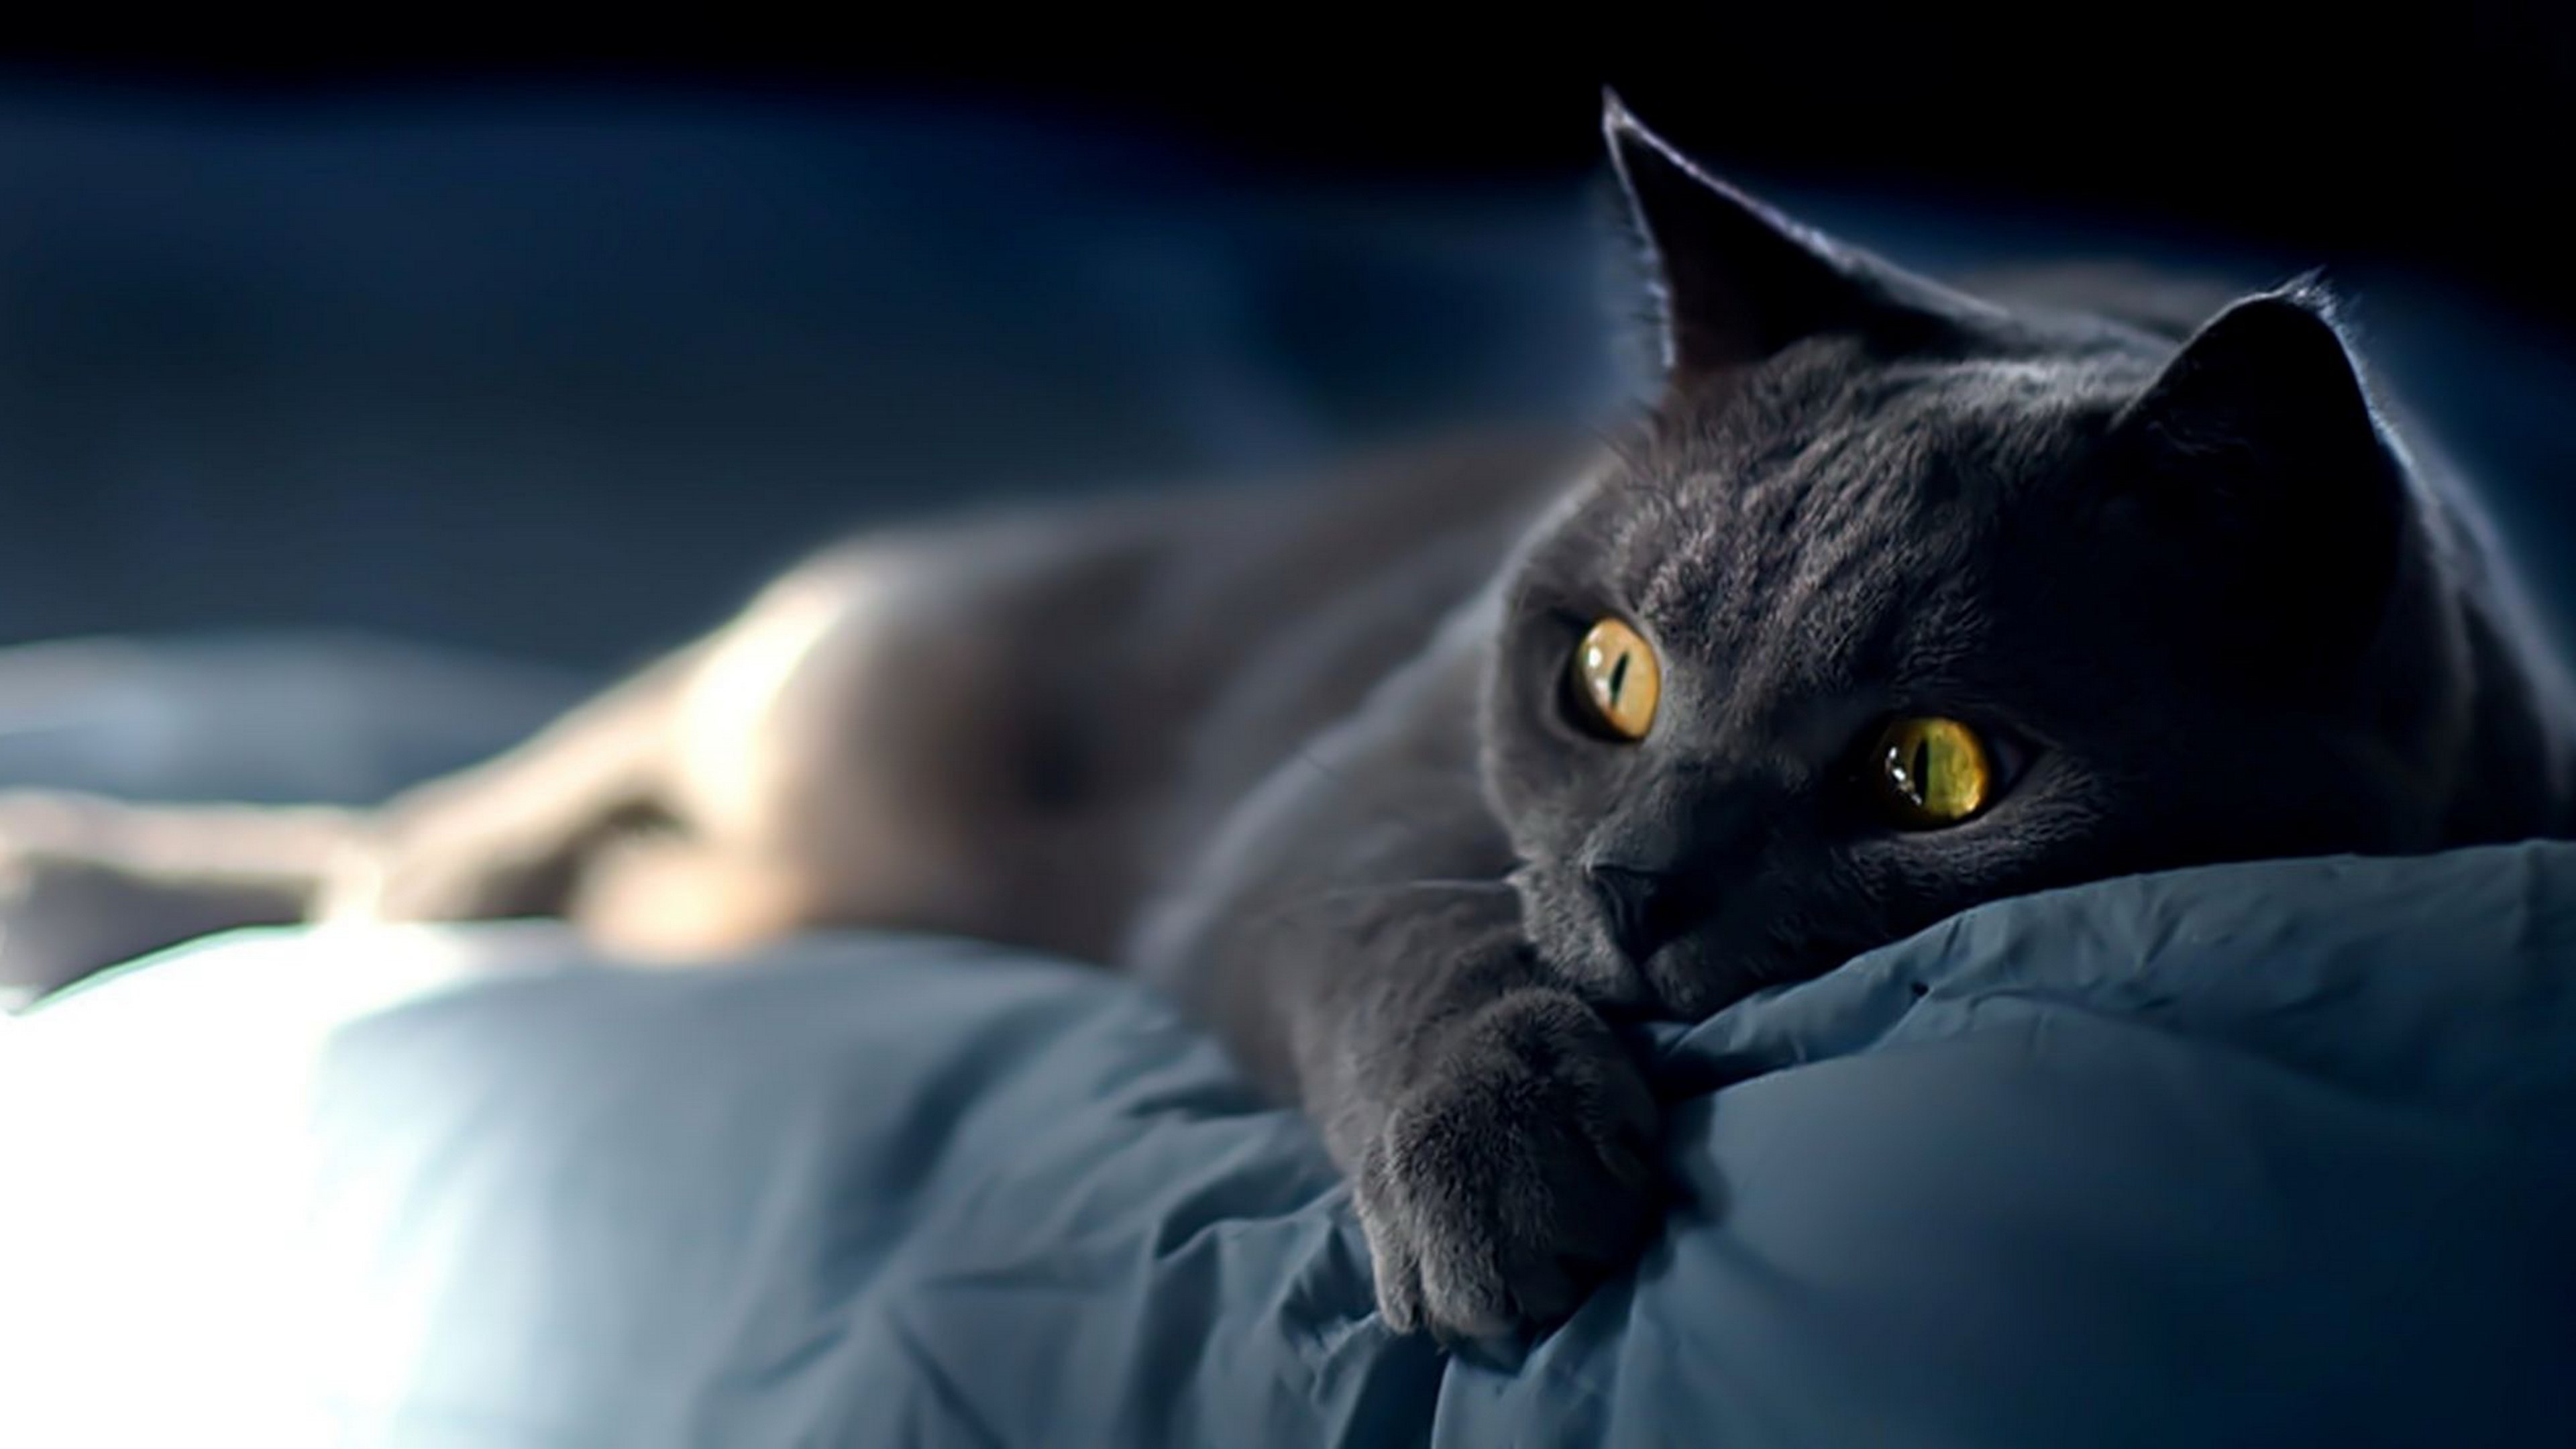 A grey cat with yellow eyes is lying on a bed. - Cat